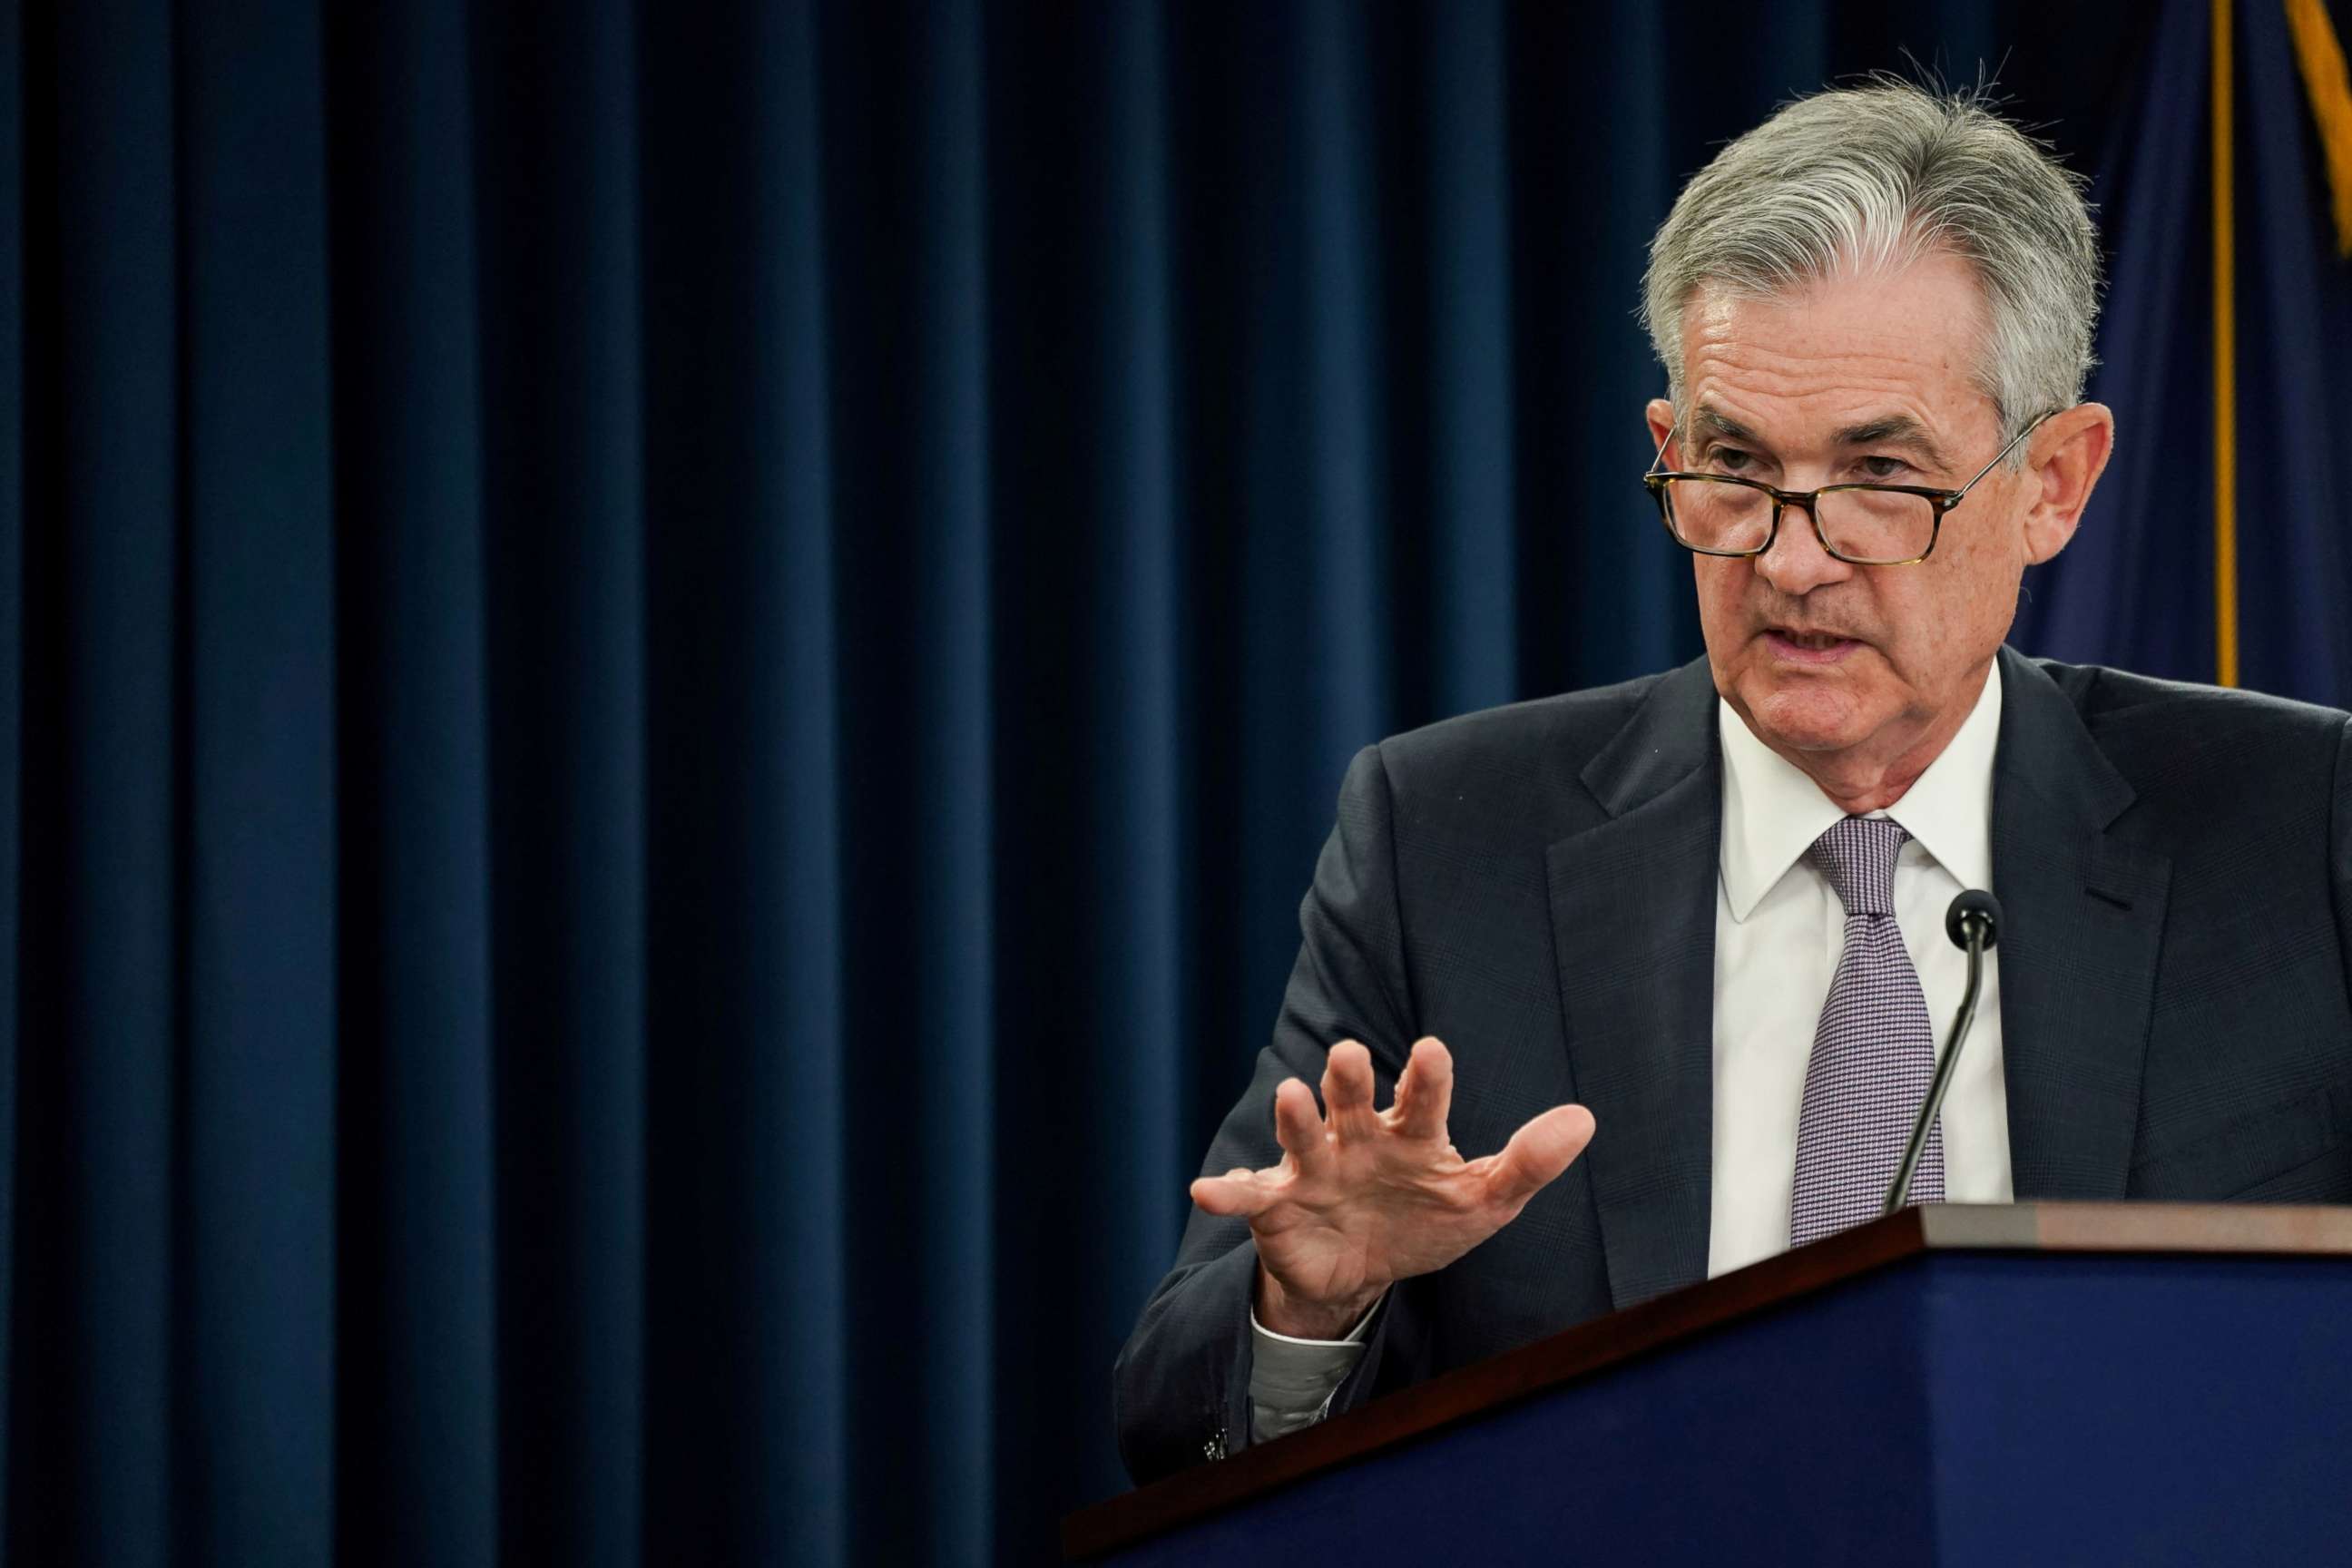 PHOTO: Federal Reserve Chairman Jerome Powell holds a news conference following a closed two-day Federal Open Market Committee meeting in Washington, Sept. 18, 2019.